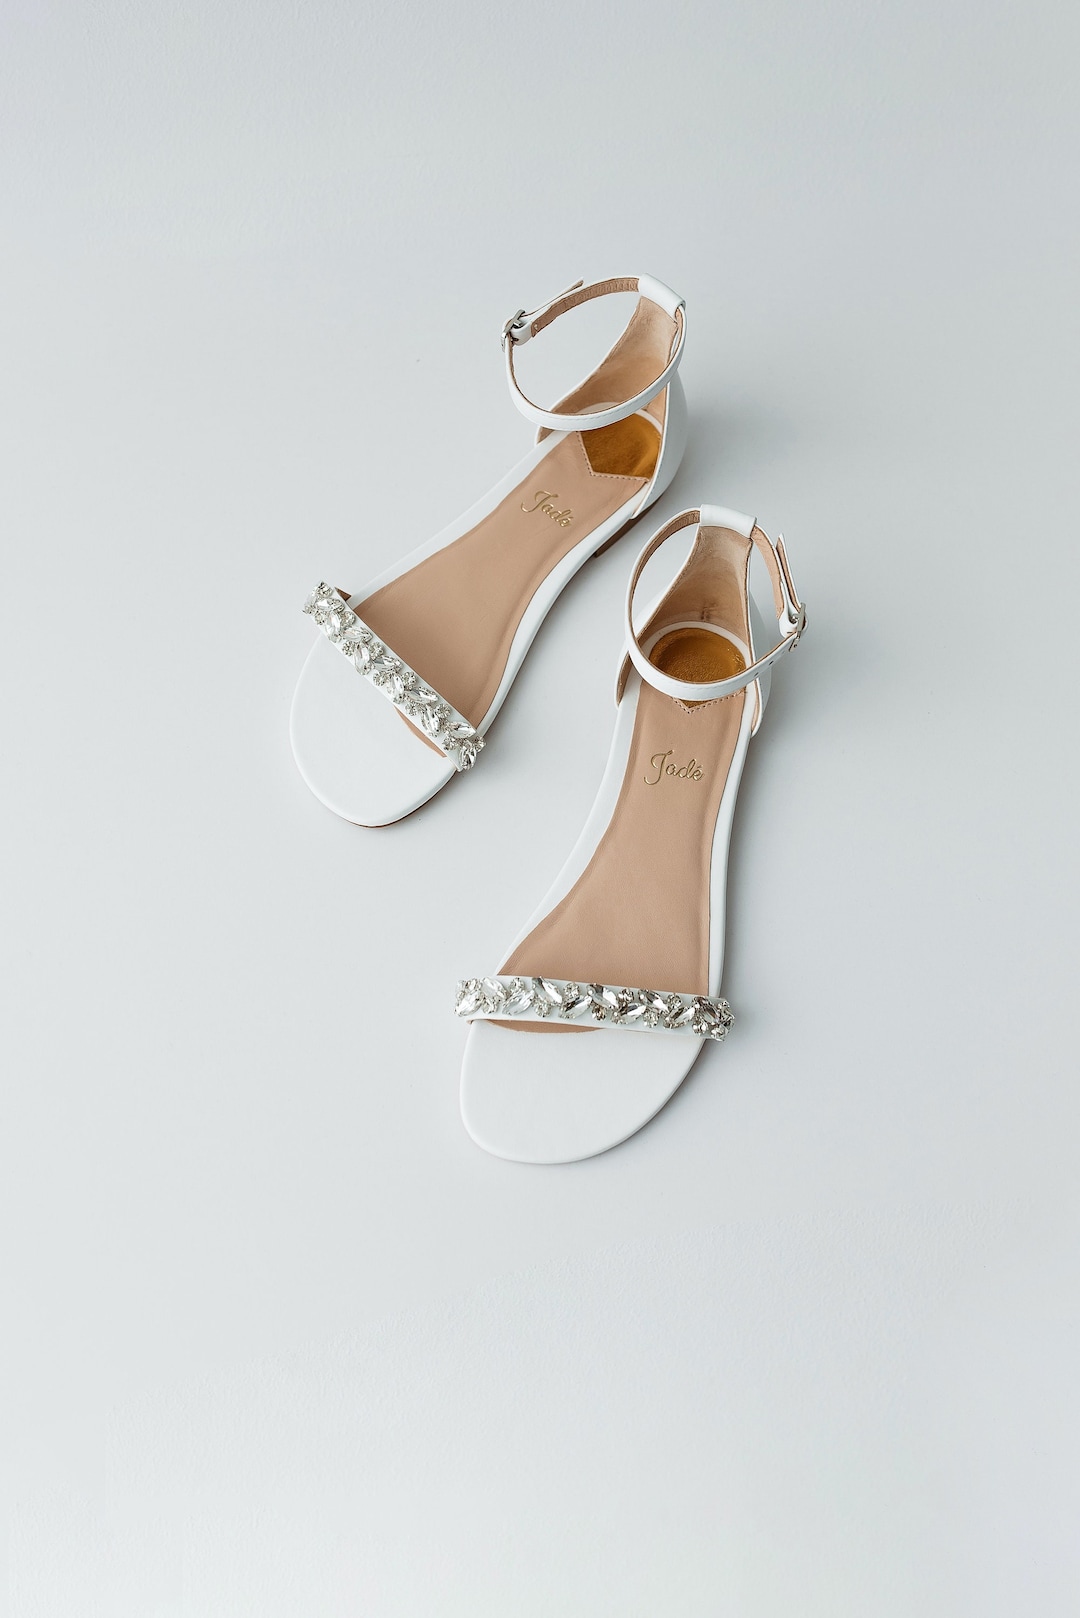 White Wedding Flats With Ankle Strap and Crystal Embroidery - Etsy